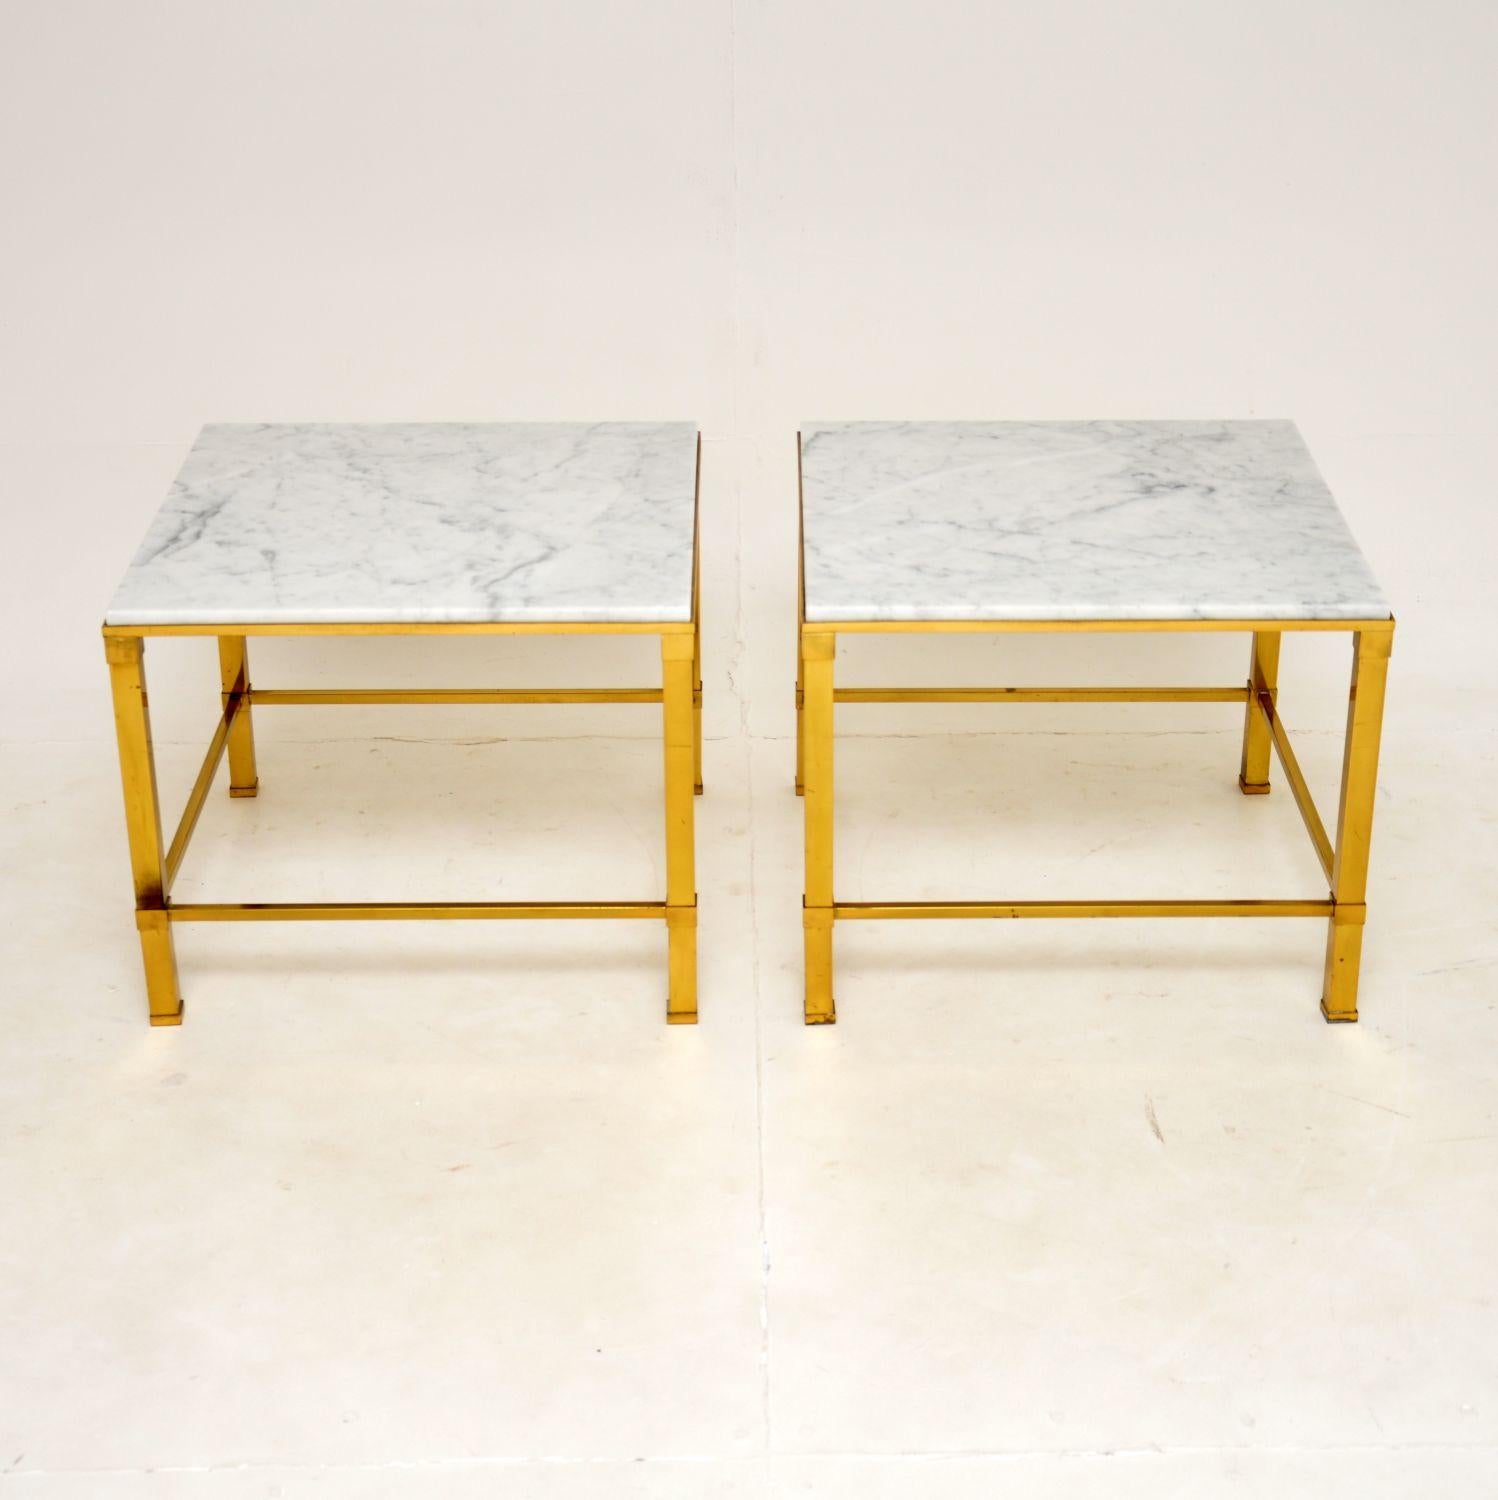 A very stylish and extremely well made pair of brass and marble side tables. They were made in Italy, and date from around the 1970’s.

The quality is superb, they are a great size and useful as end tables in a living room or even as bedside